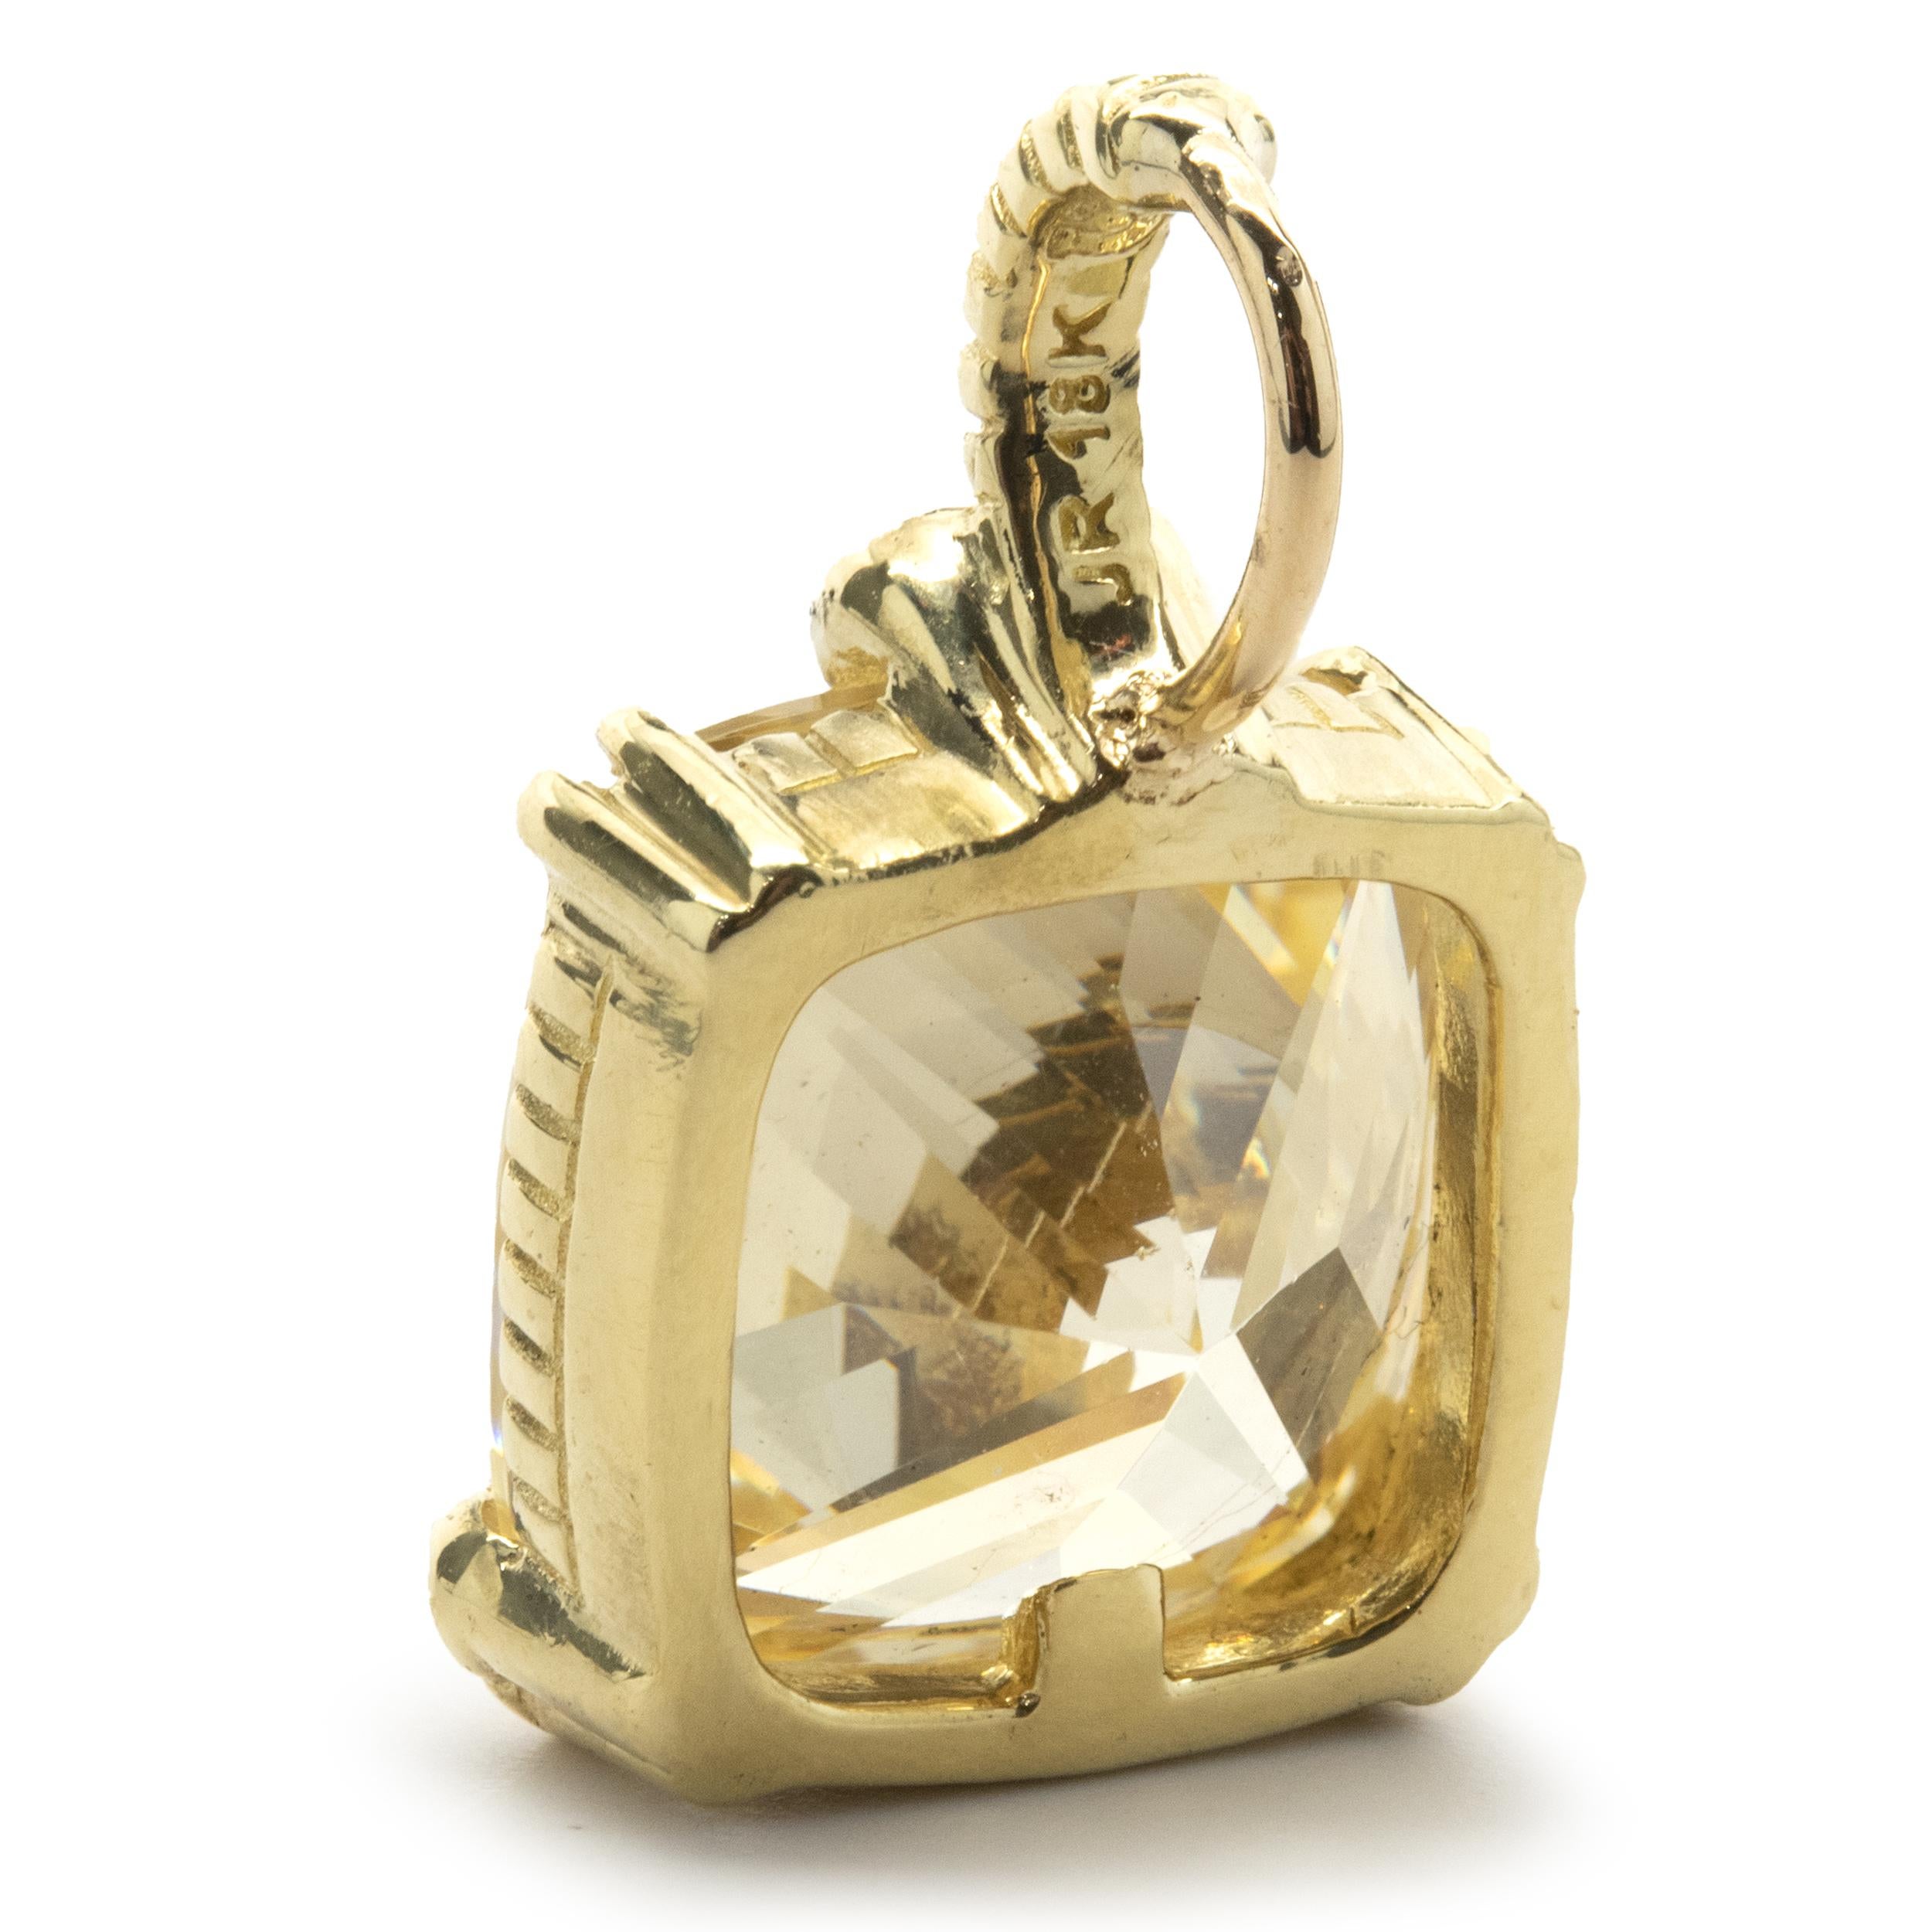 Designer: Judith Ripka
Material: 18K yellow gold
Diamond: 5 round cut = .05cttw
Color: G
Clarity: VS2
Dimensions: pendant measures 20.4 X 12.75mm
Weight: 6.15 grams
